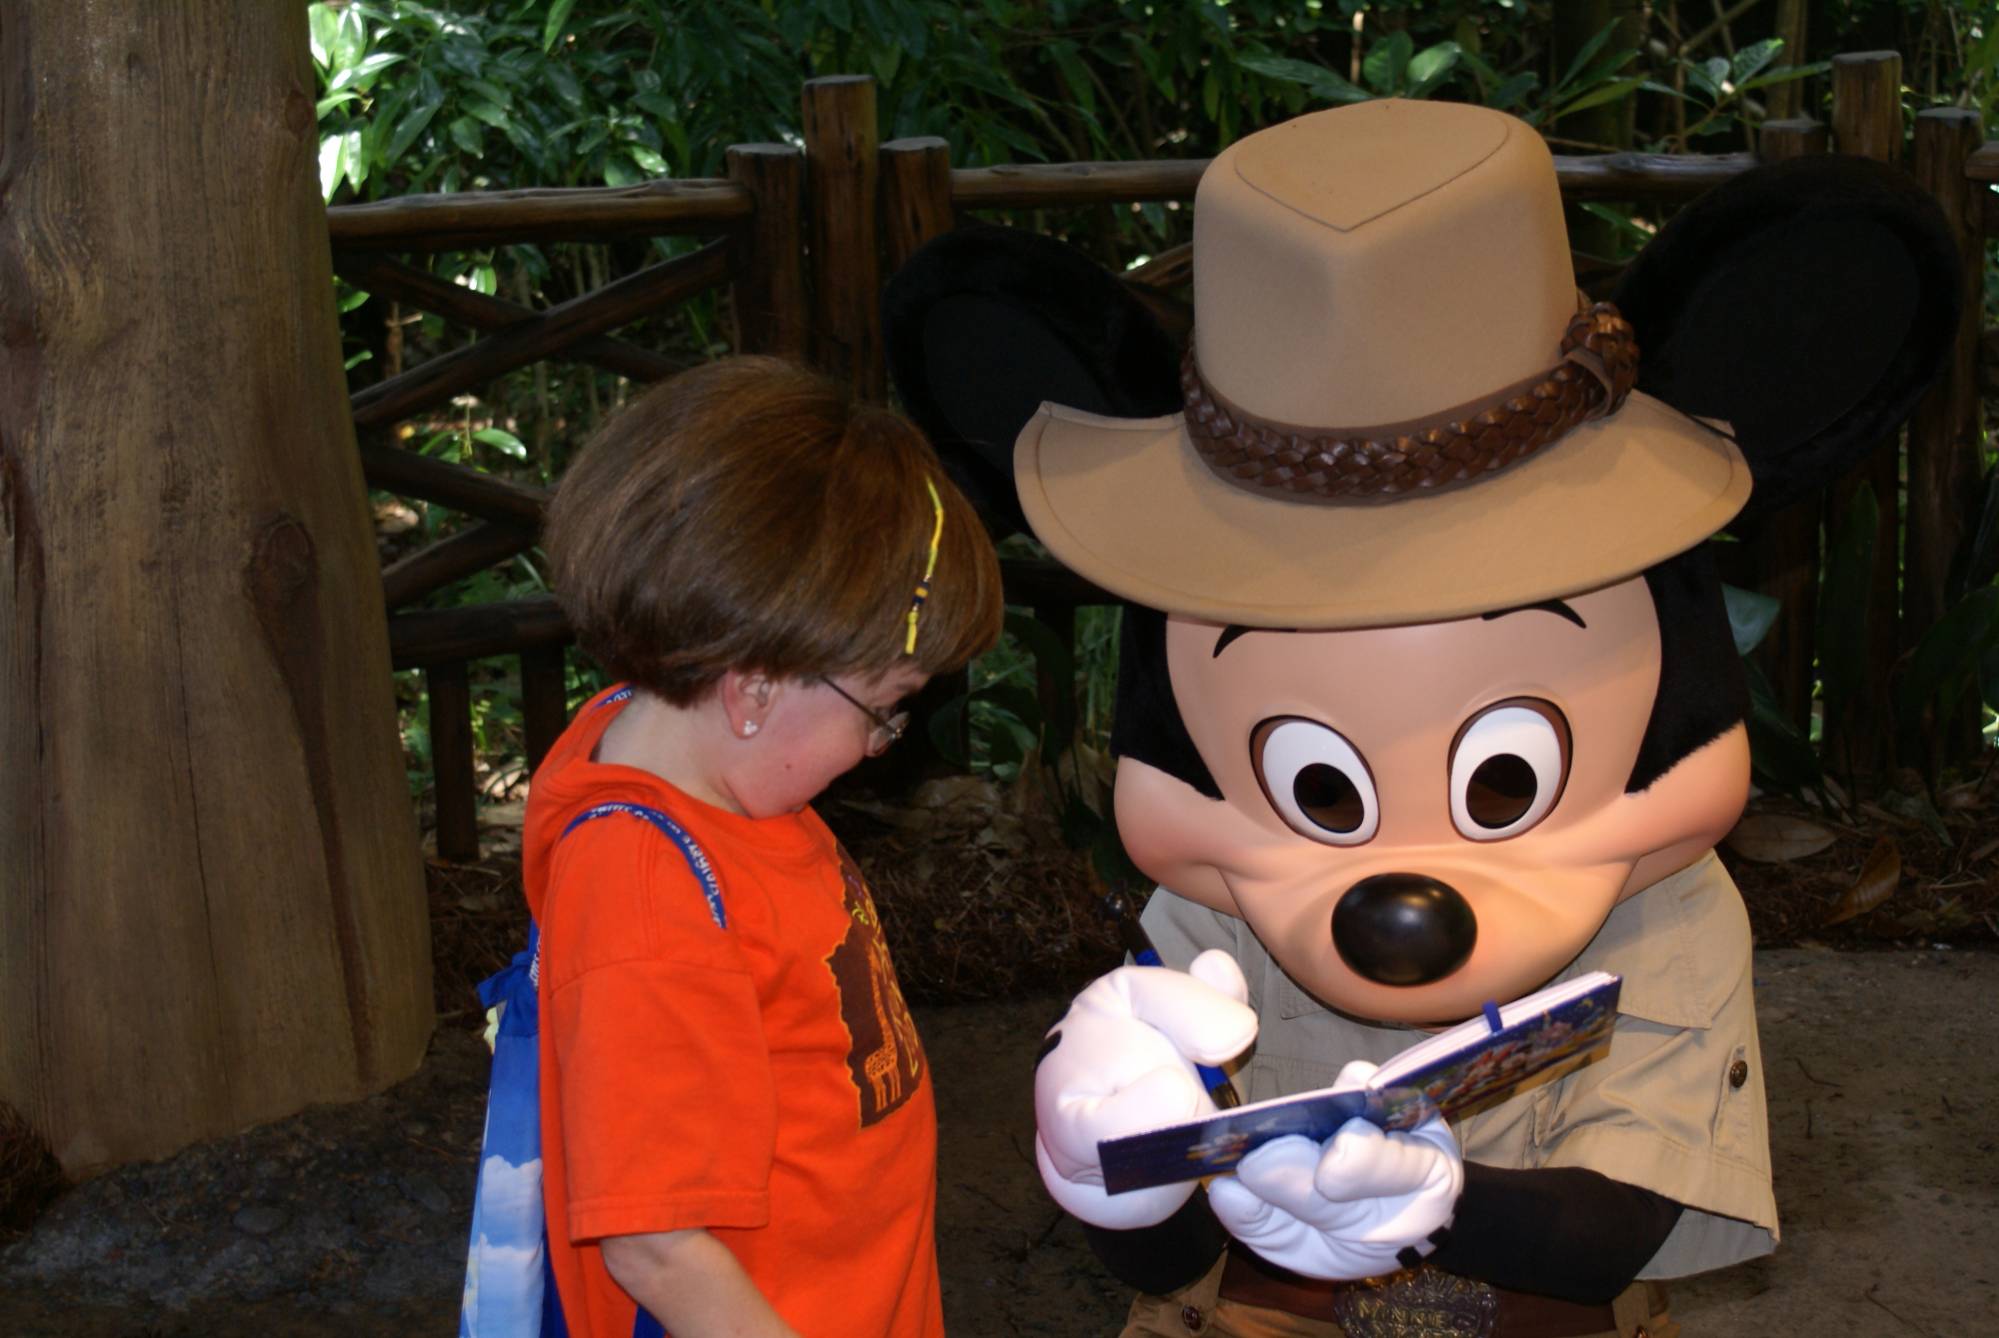 Tips and tricks on finding and meeting Disney characters |PassPorter.com